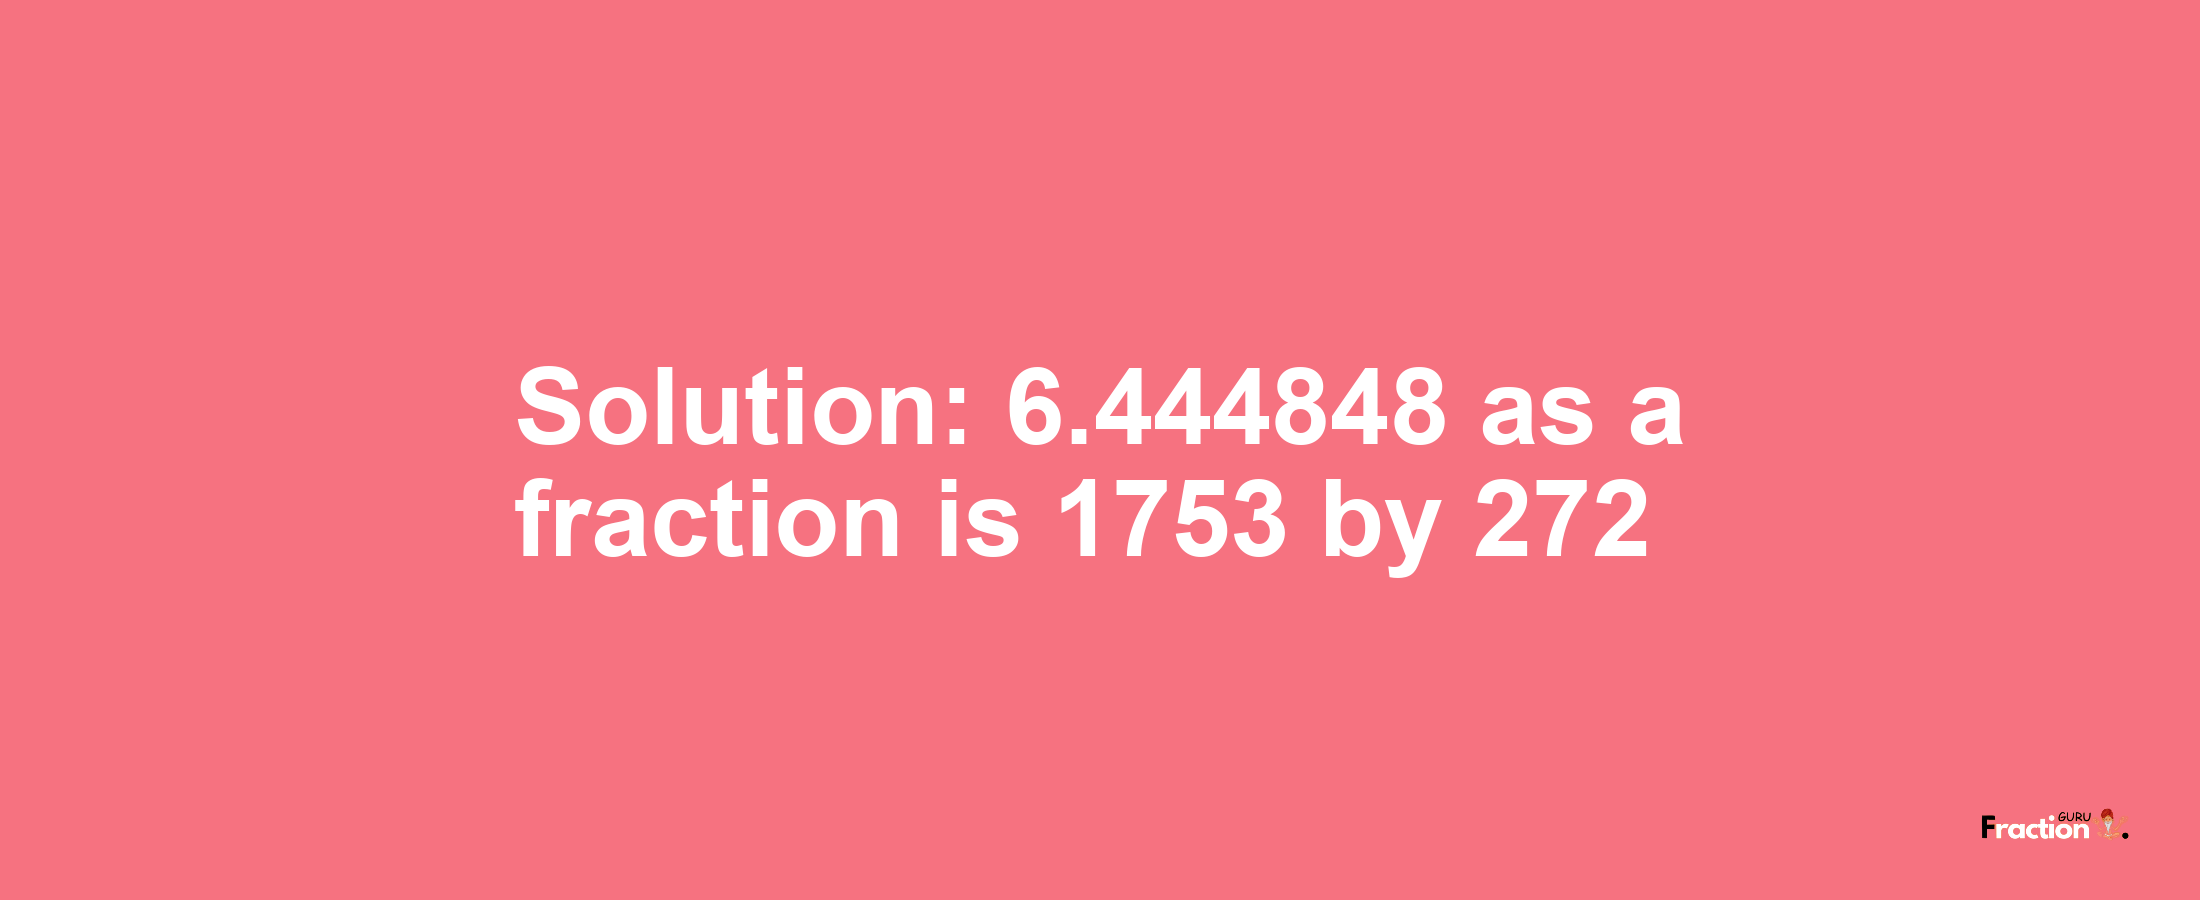 Solution:6.444848 as a fraction is 1753/272